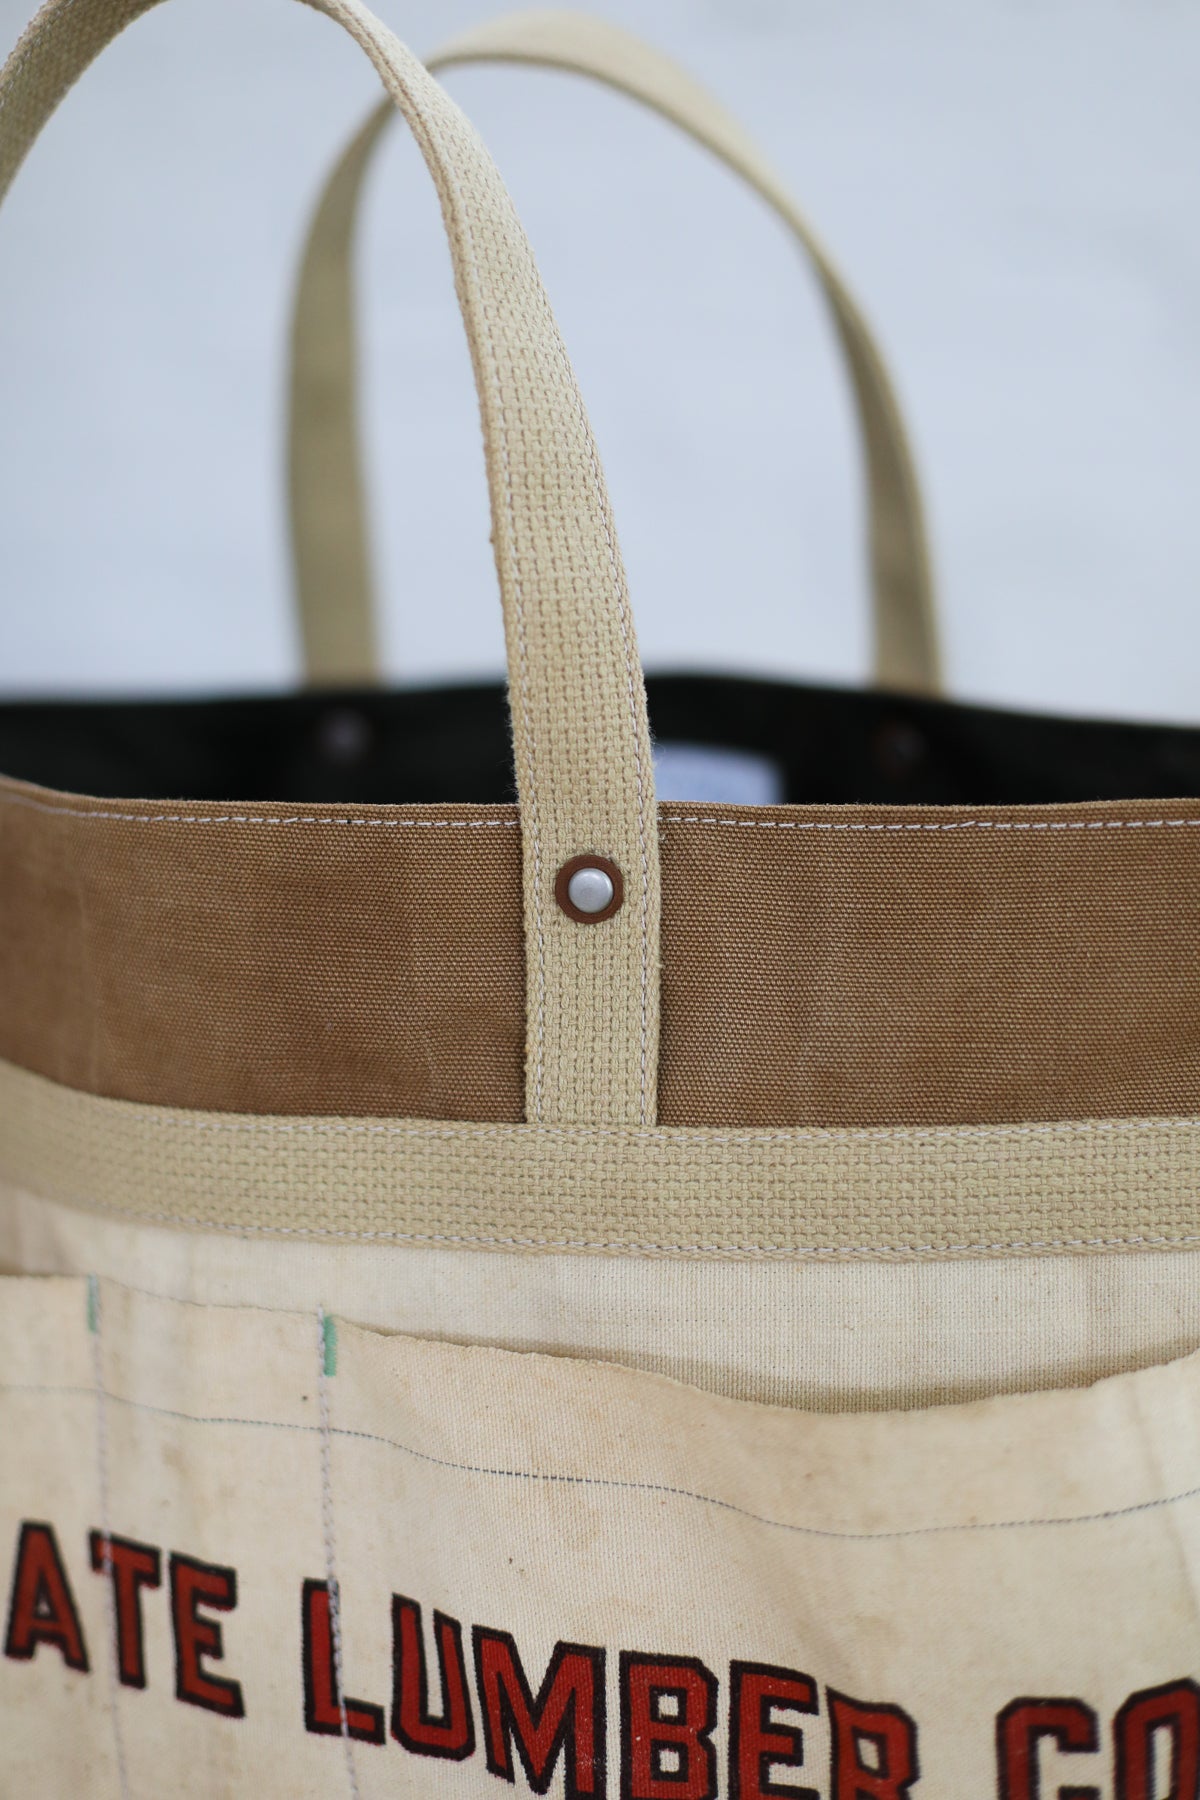 1950's era Salvaged Work Apron and Canvas Tote Bag